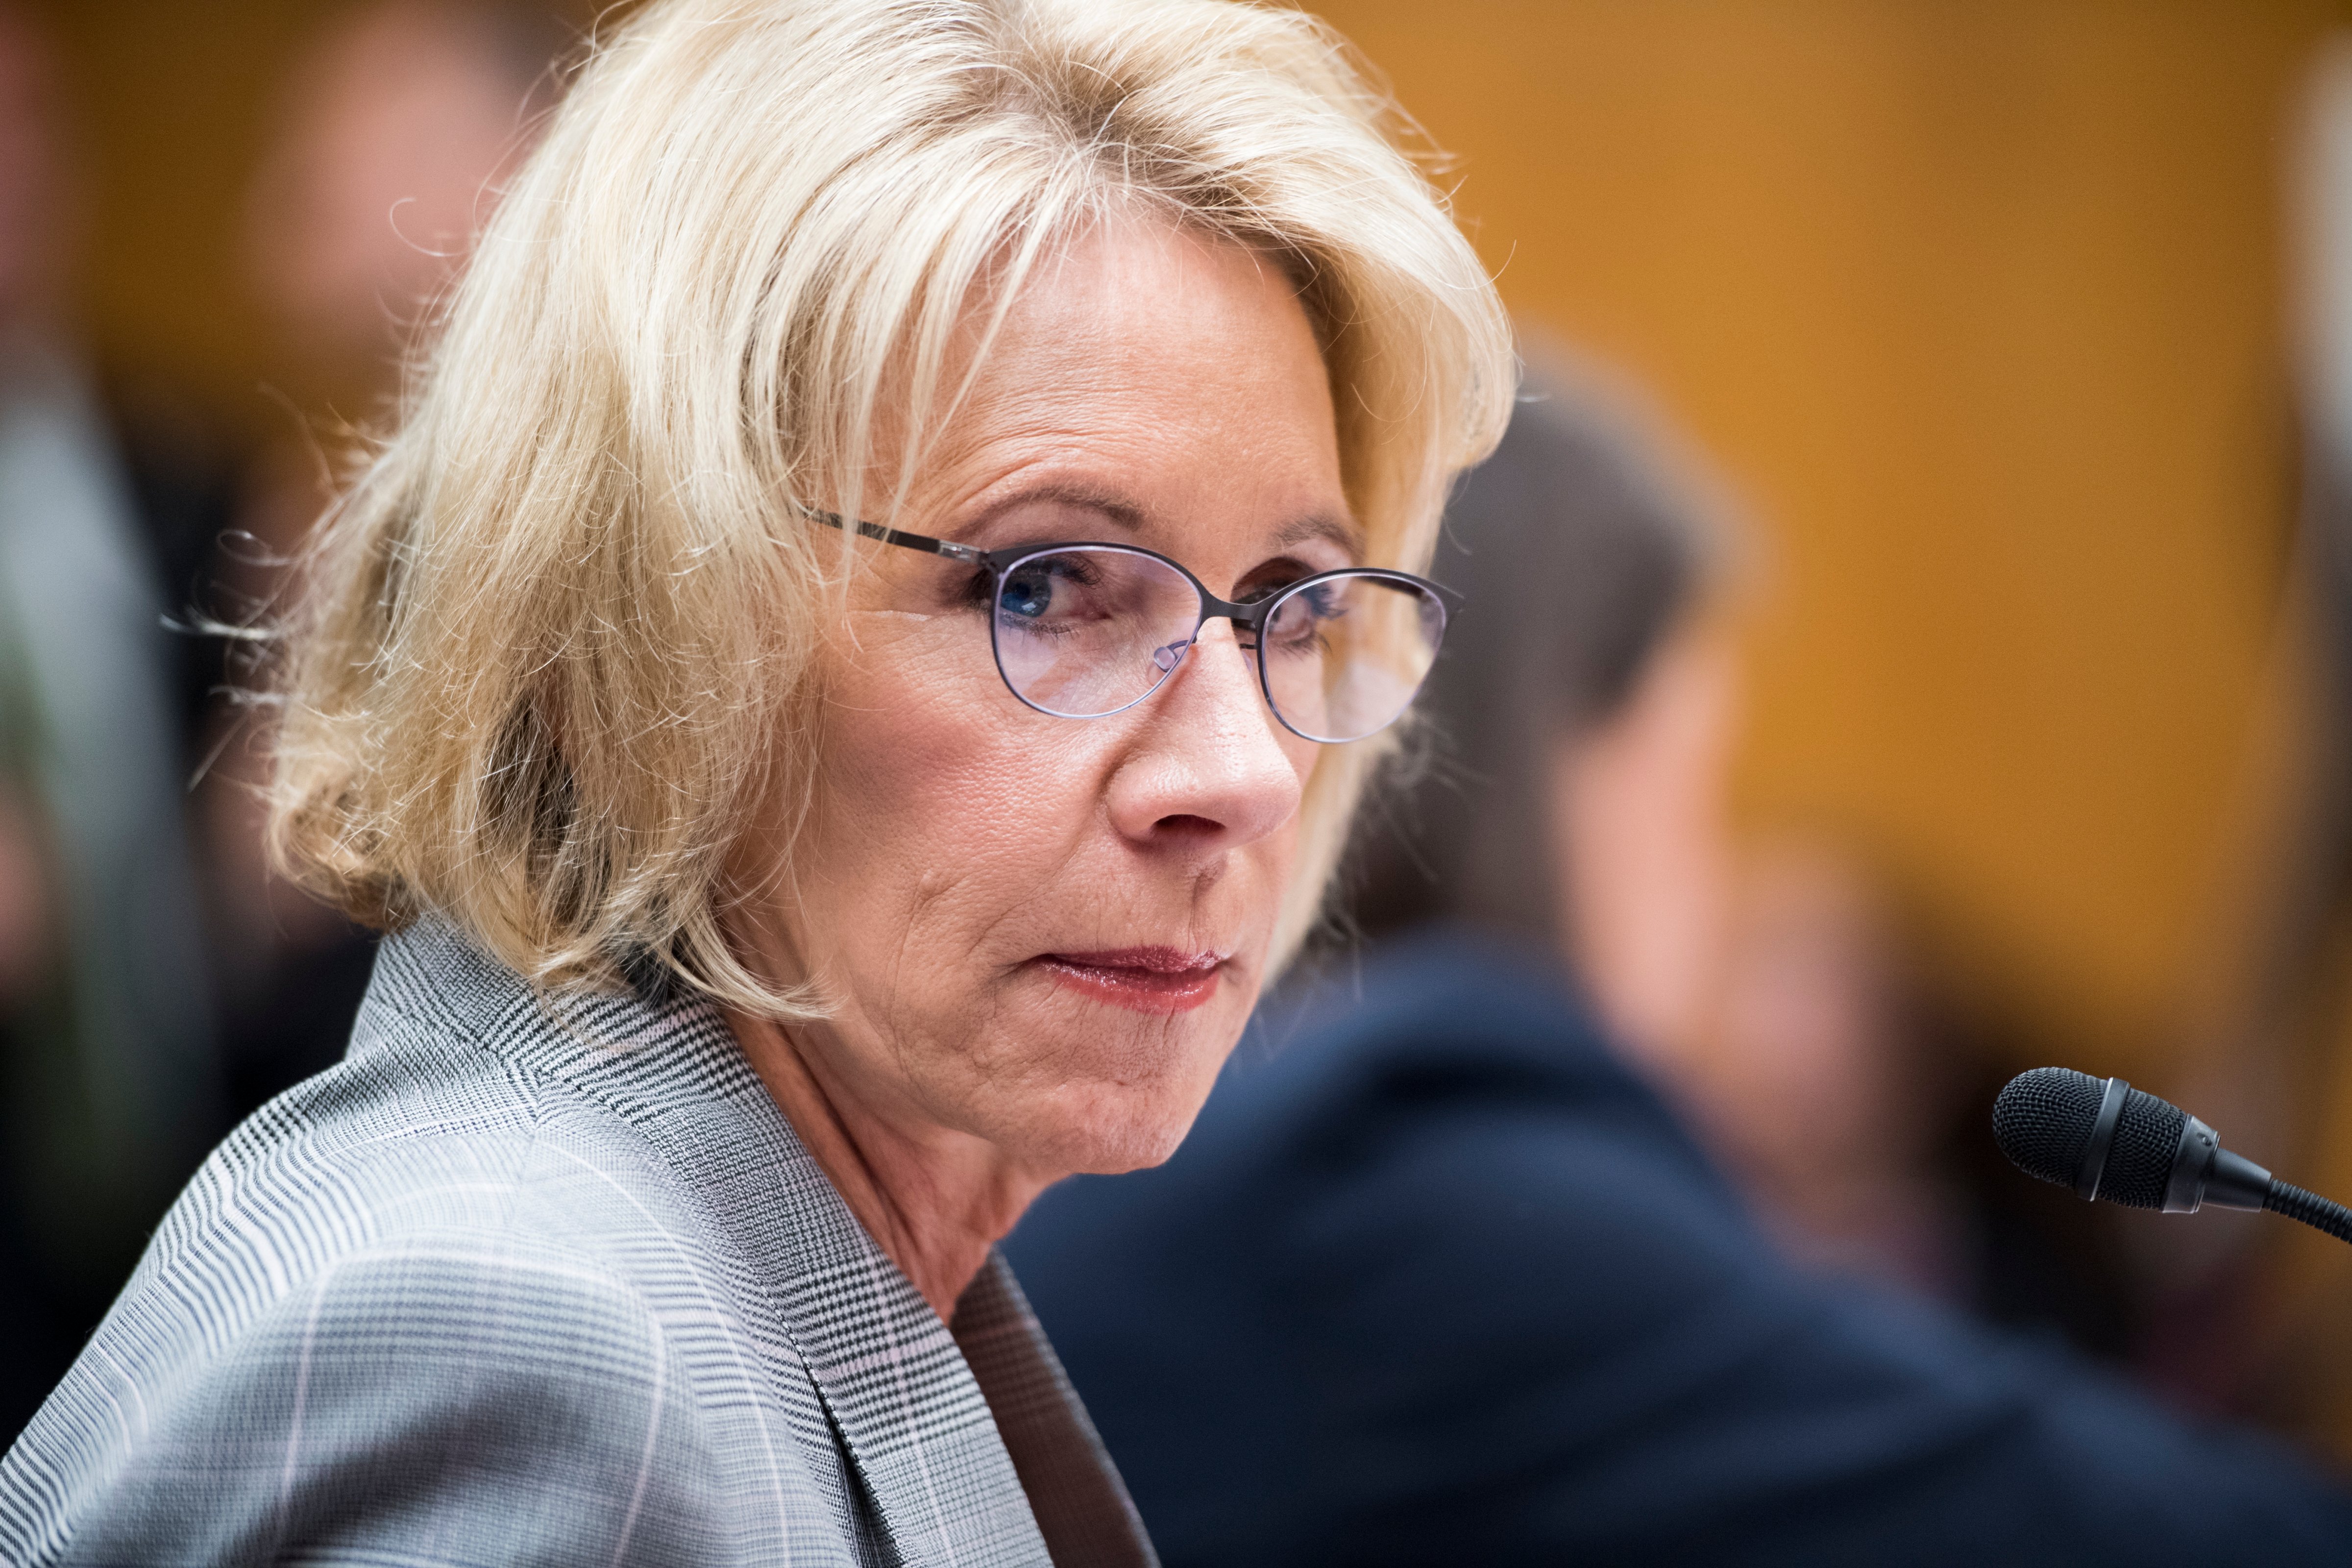 UNITED STATES - JUNE 6: Secretary of Education Betsy DeVos prepares to testify during the Senate Appropriations Committee Labor, Health and Human Services, Education and Related Agencies Subcommittee hearing on the FY2018 budget request for the Education Department on Tuesday, June 6, 2017. (Photo By Bill Clark/CQ Roll Call) (Bill Clark&mdash;CQ-Roll Call,Inc.)